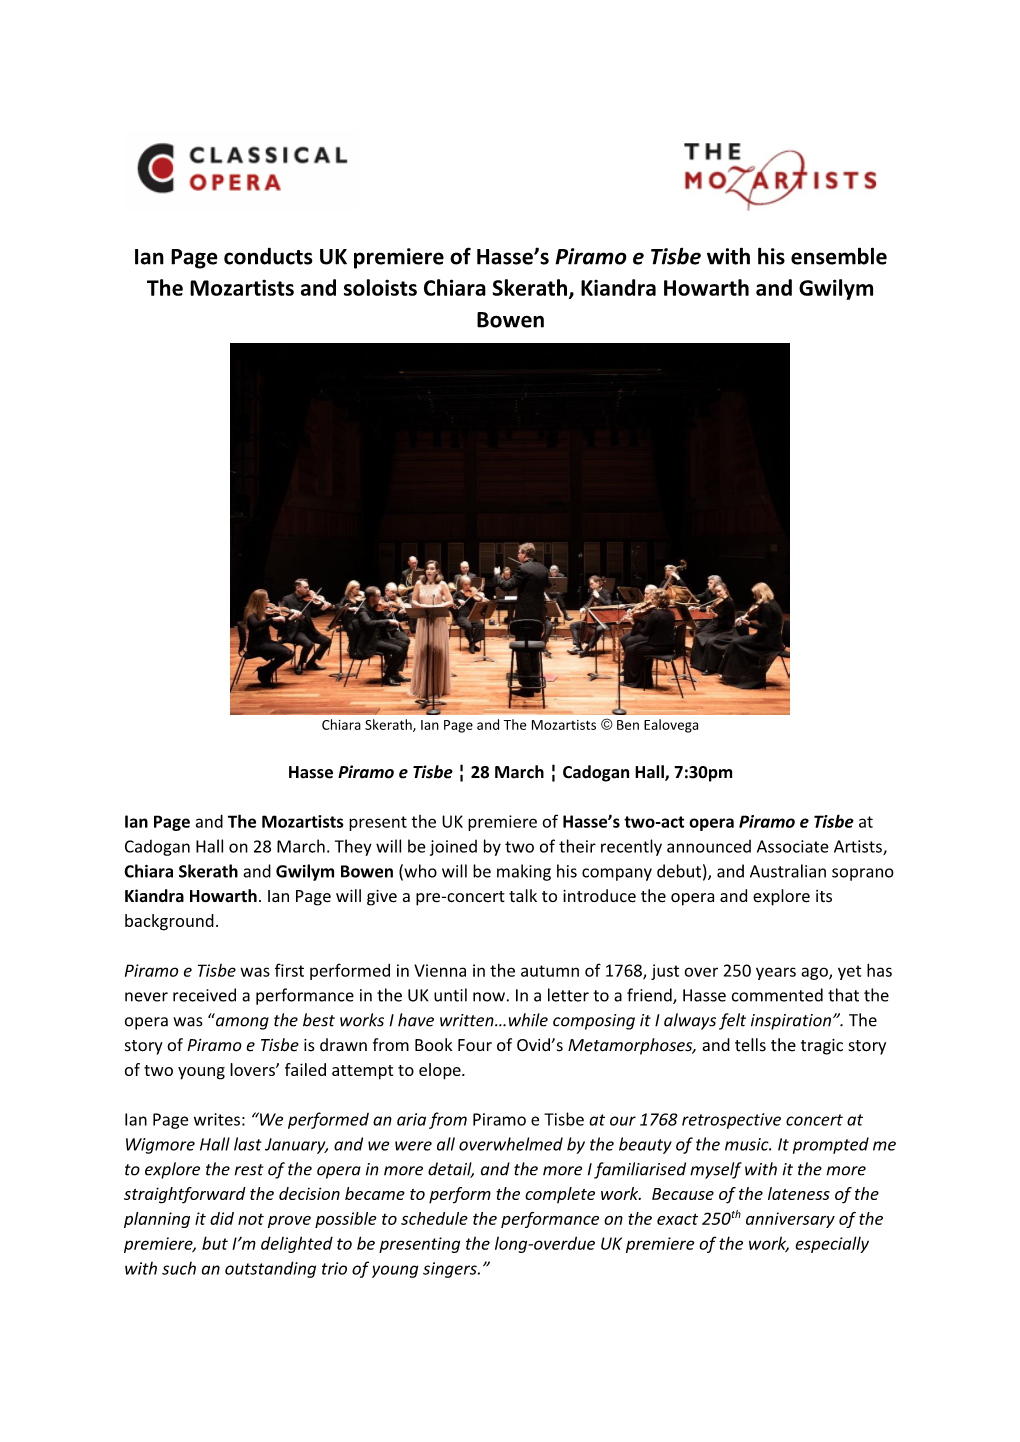 Ian Page Conducts UK Premiere of Hasse's Piramo E Tisbe with His